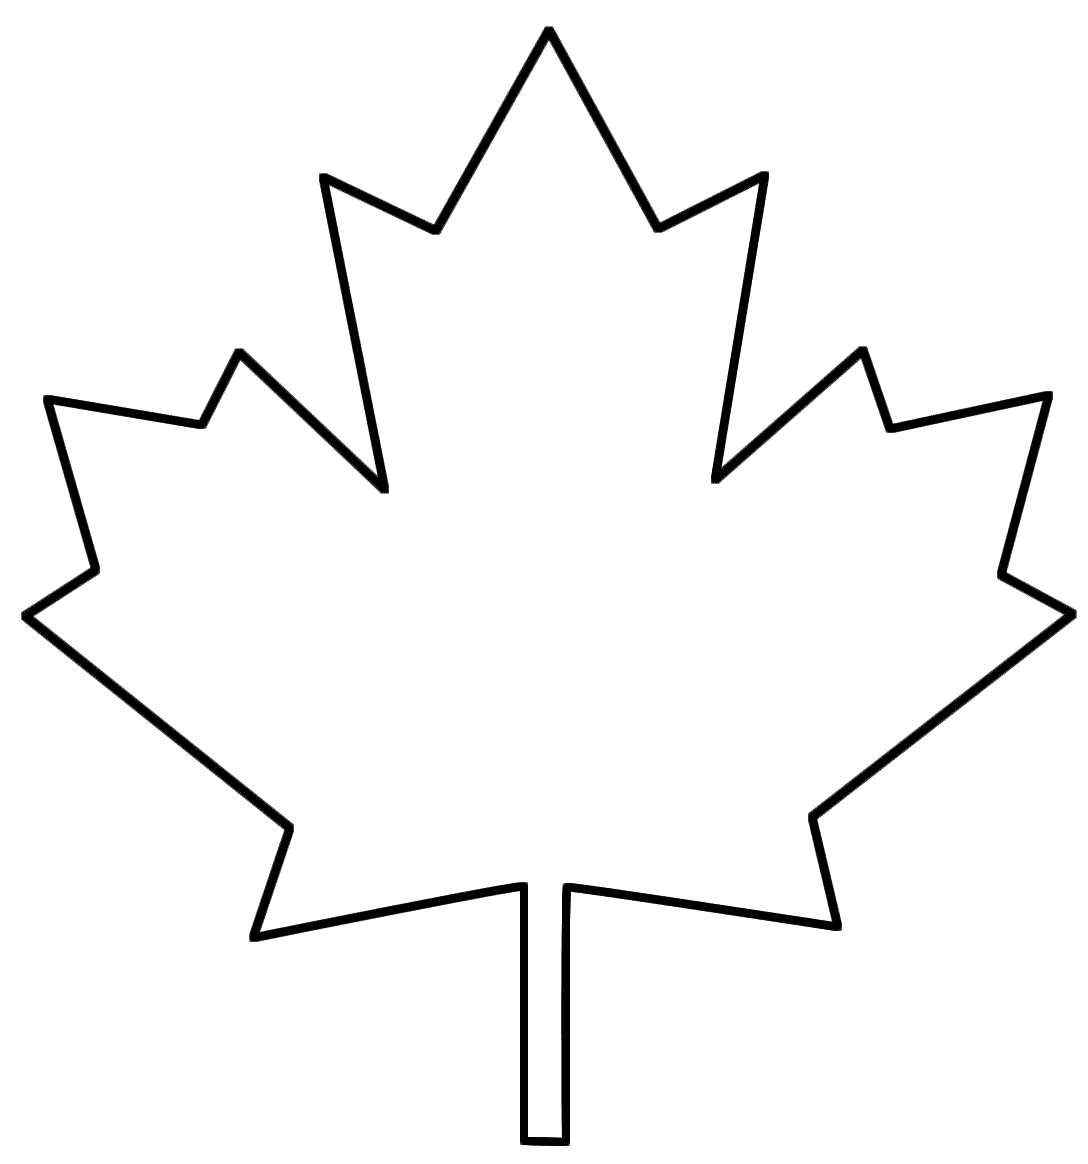 Canada maple leaf clipart